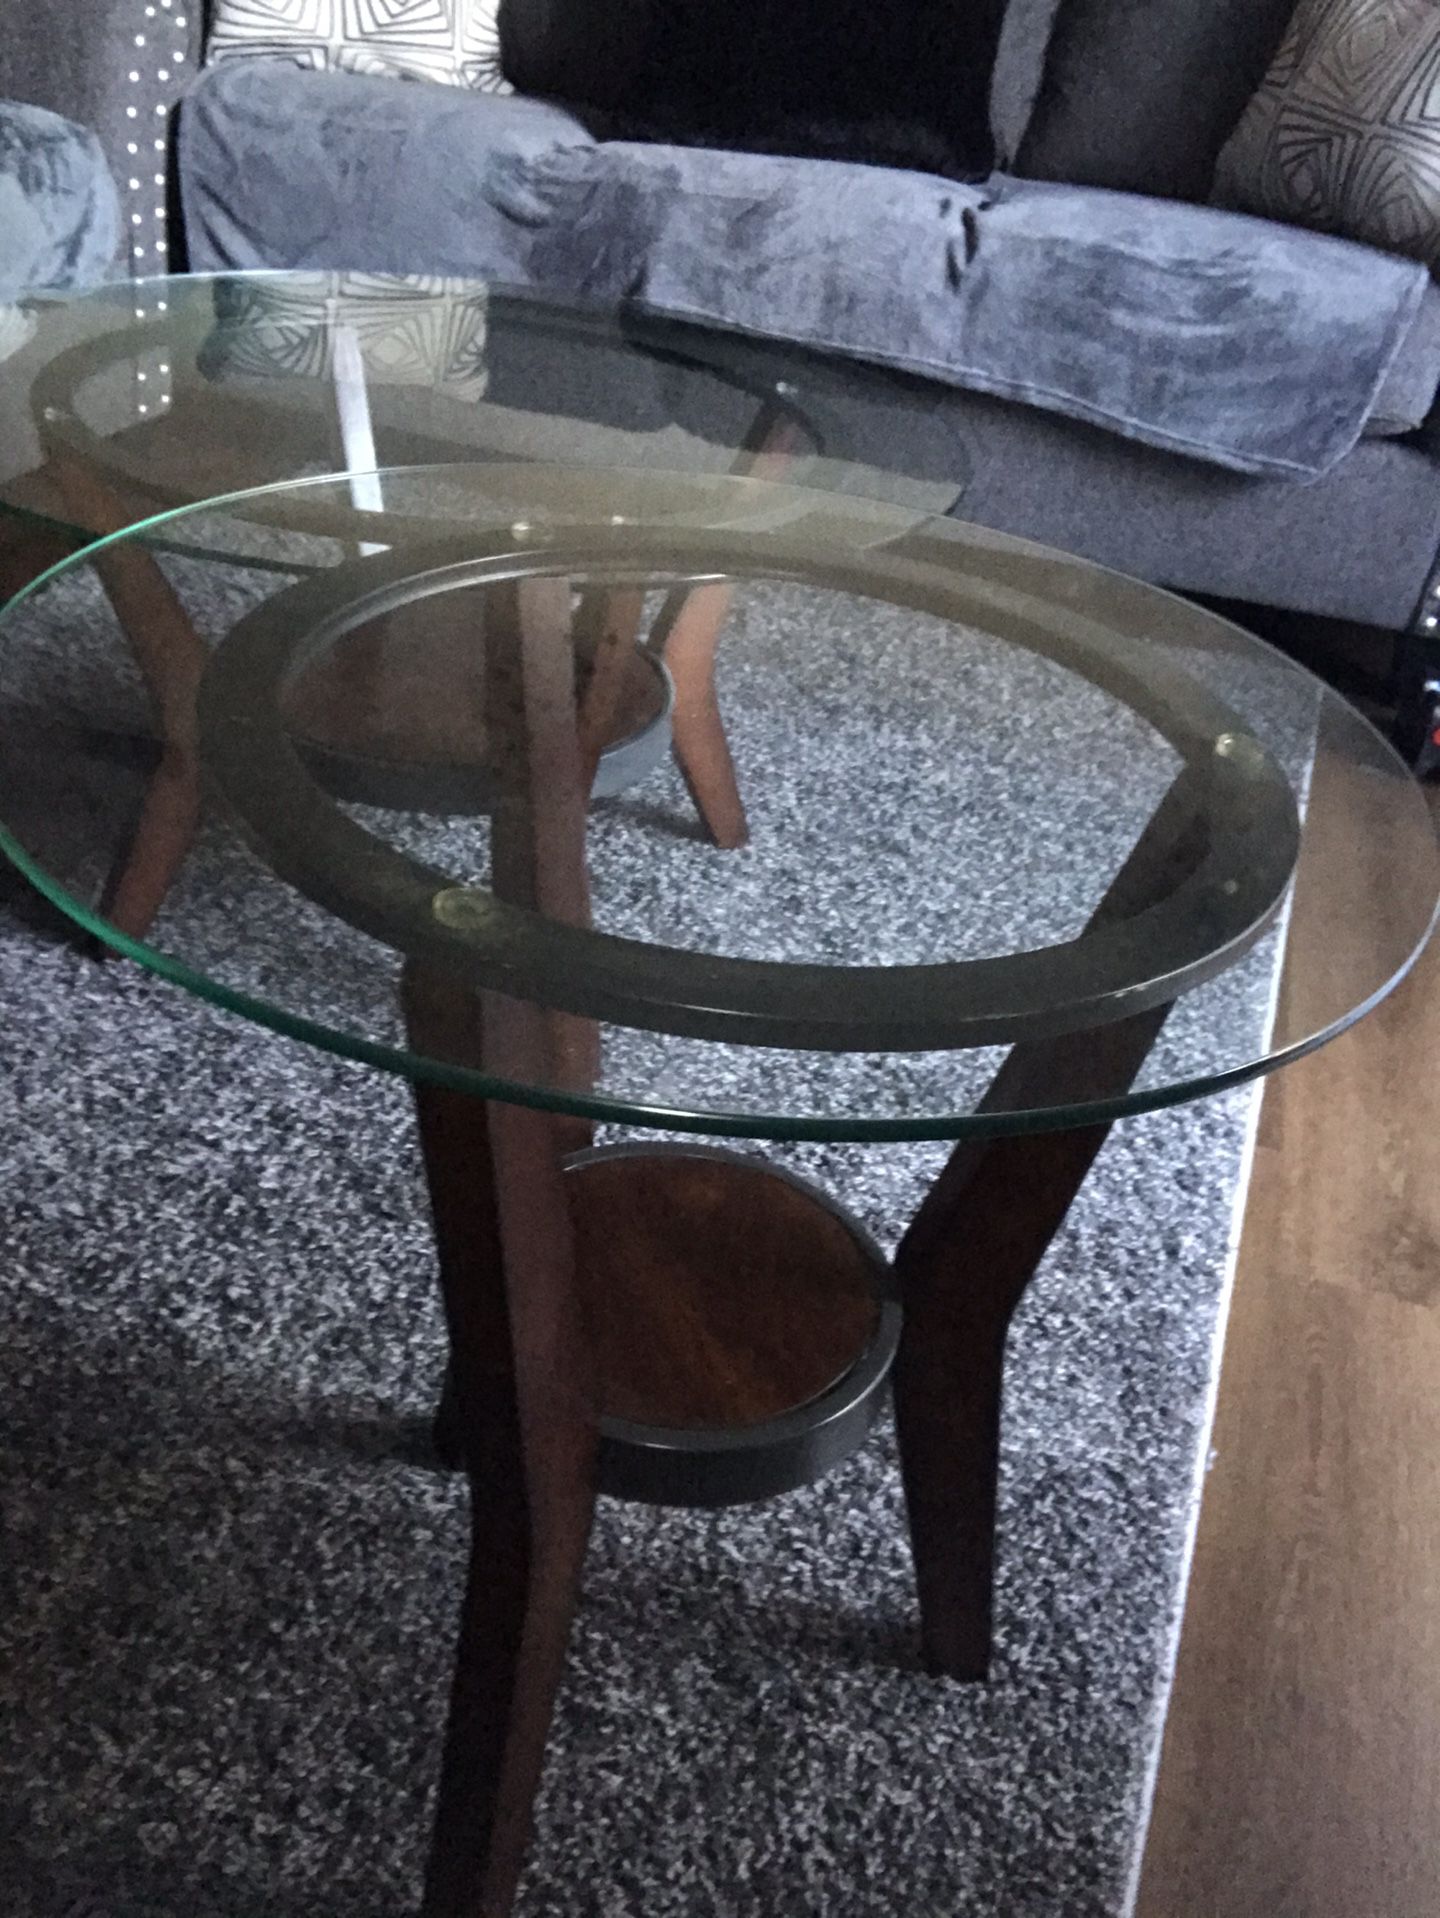 End table and coffee table, please serious buyer only